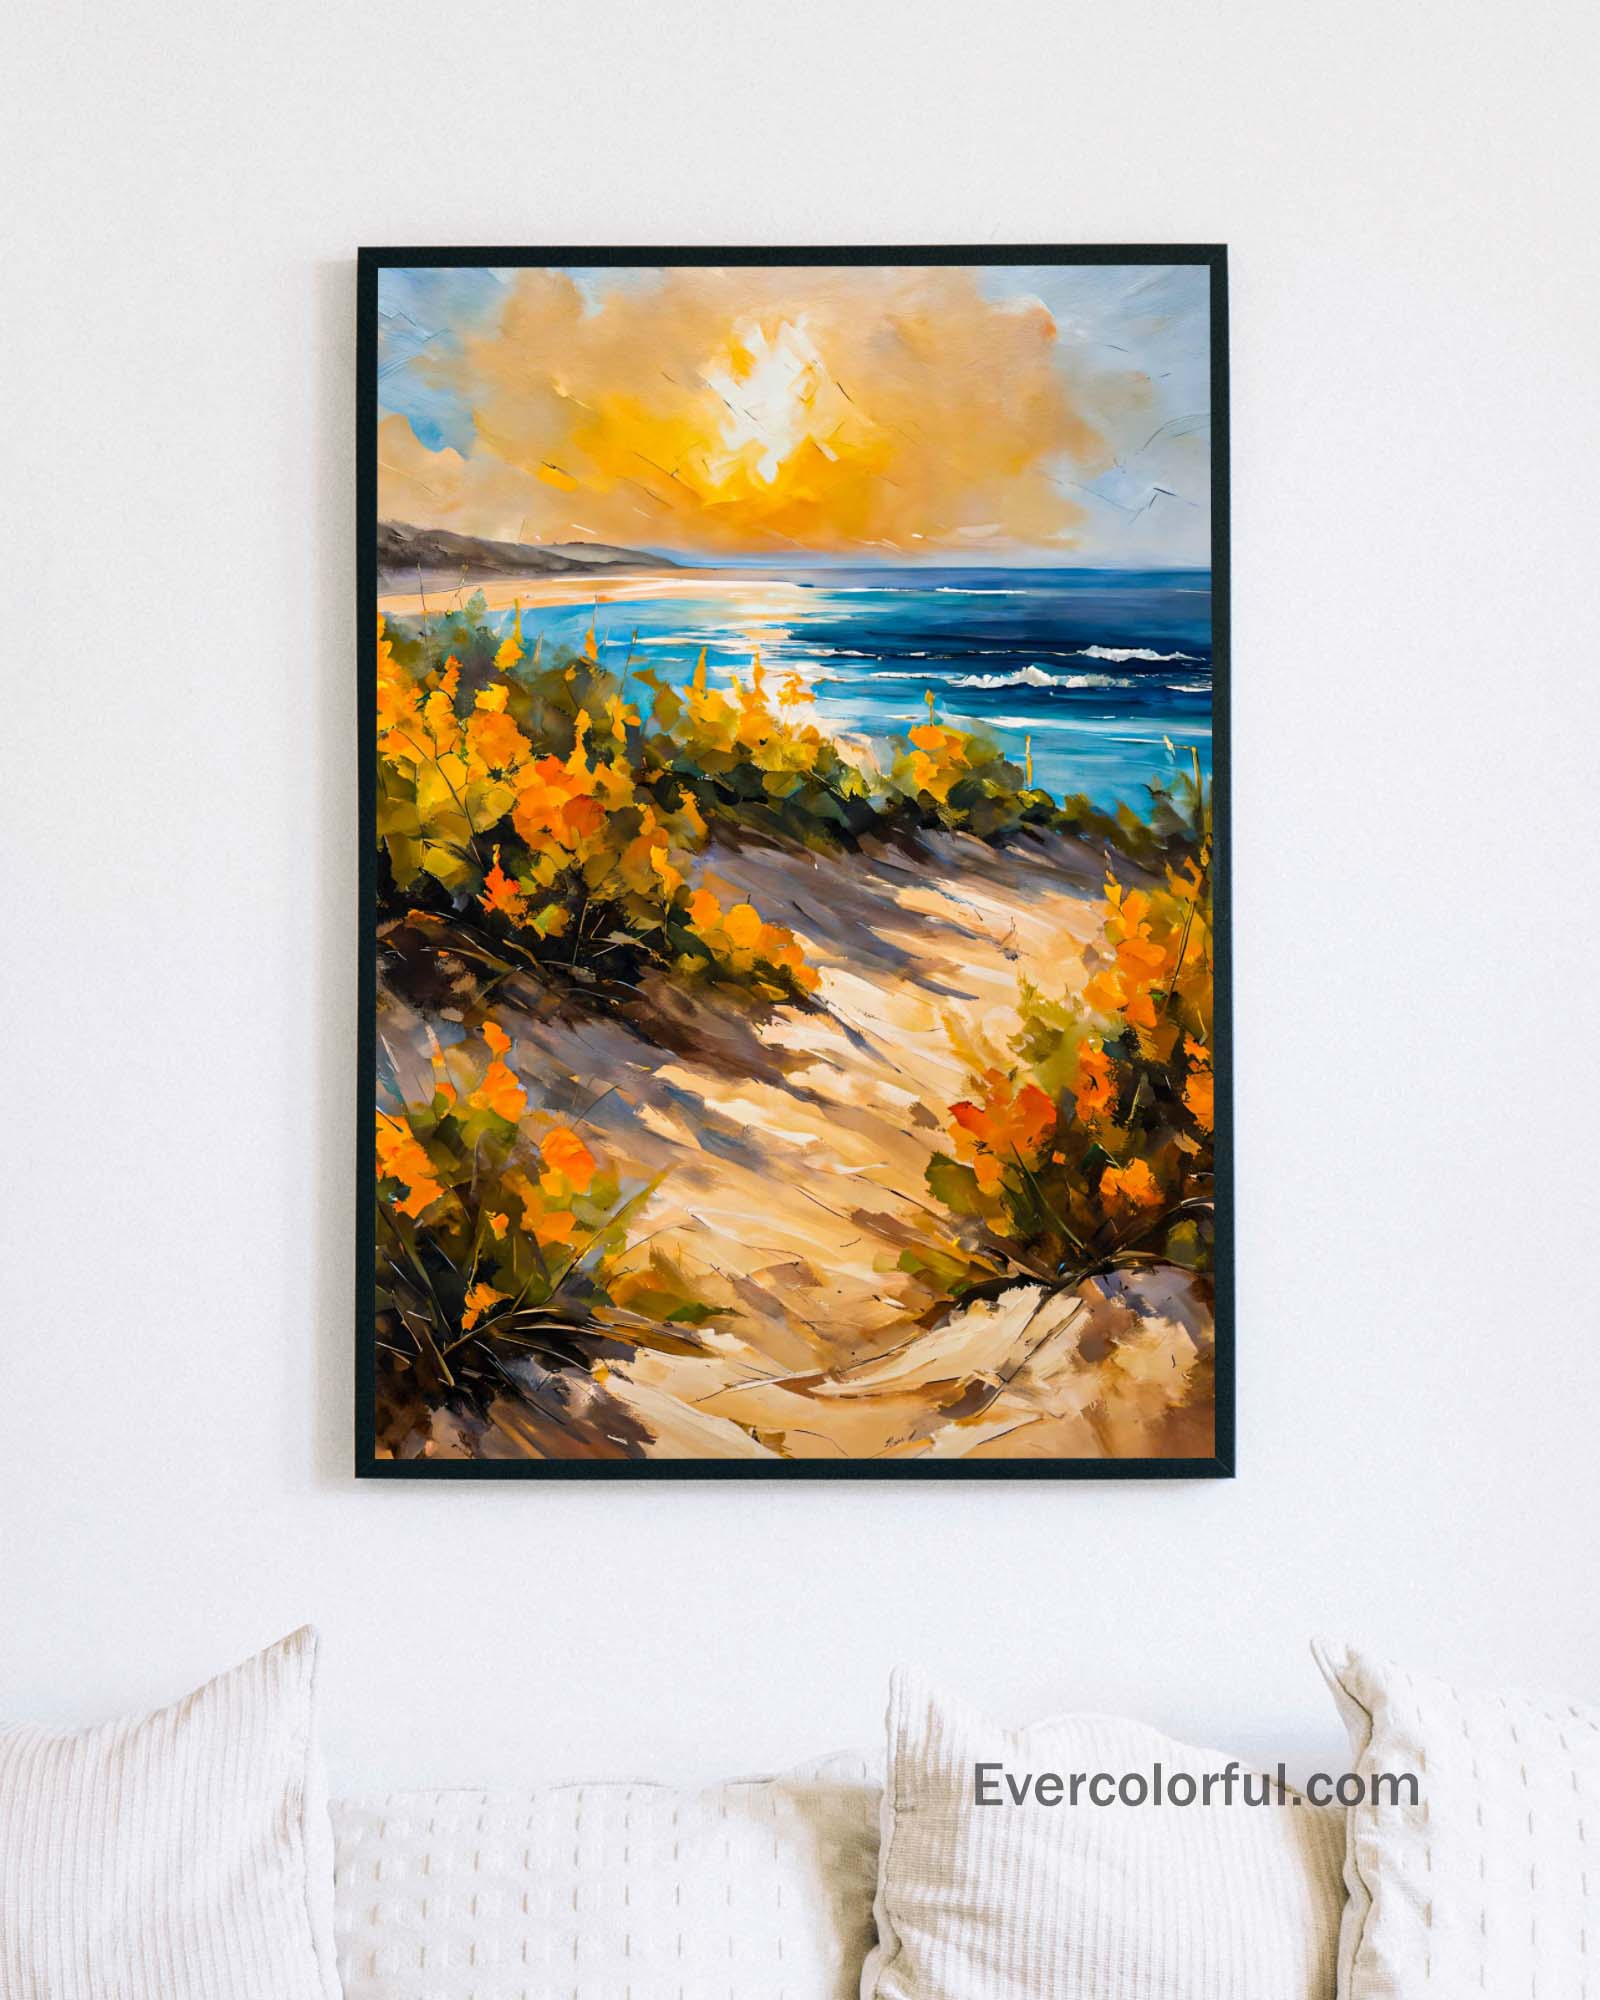 Sandy coast - Poster - Ever colorful